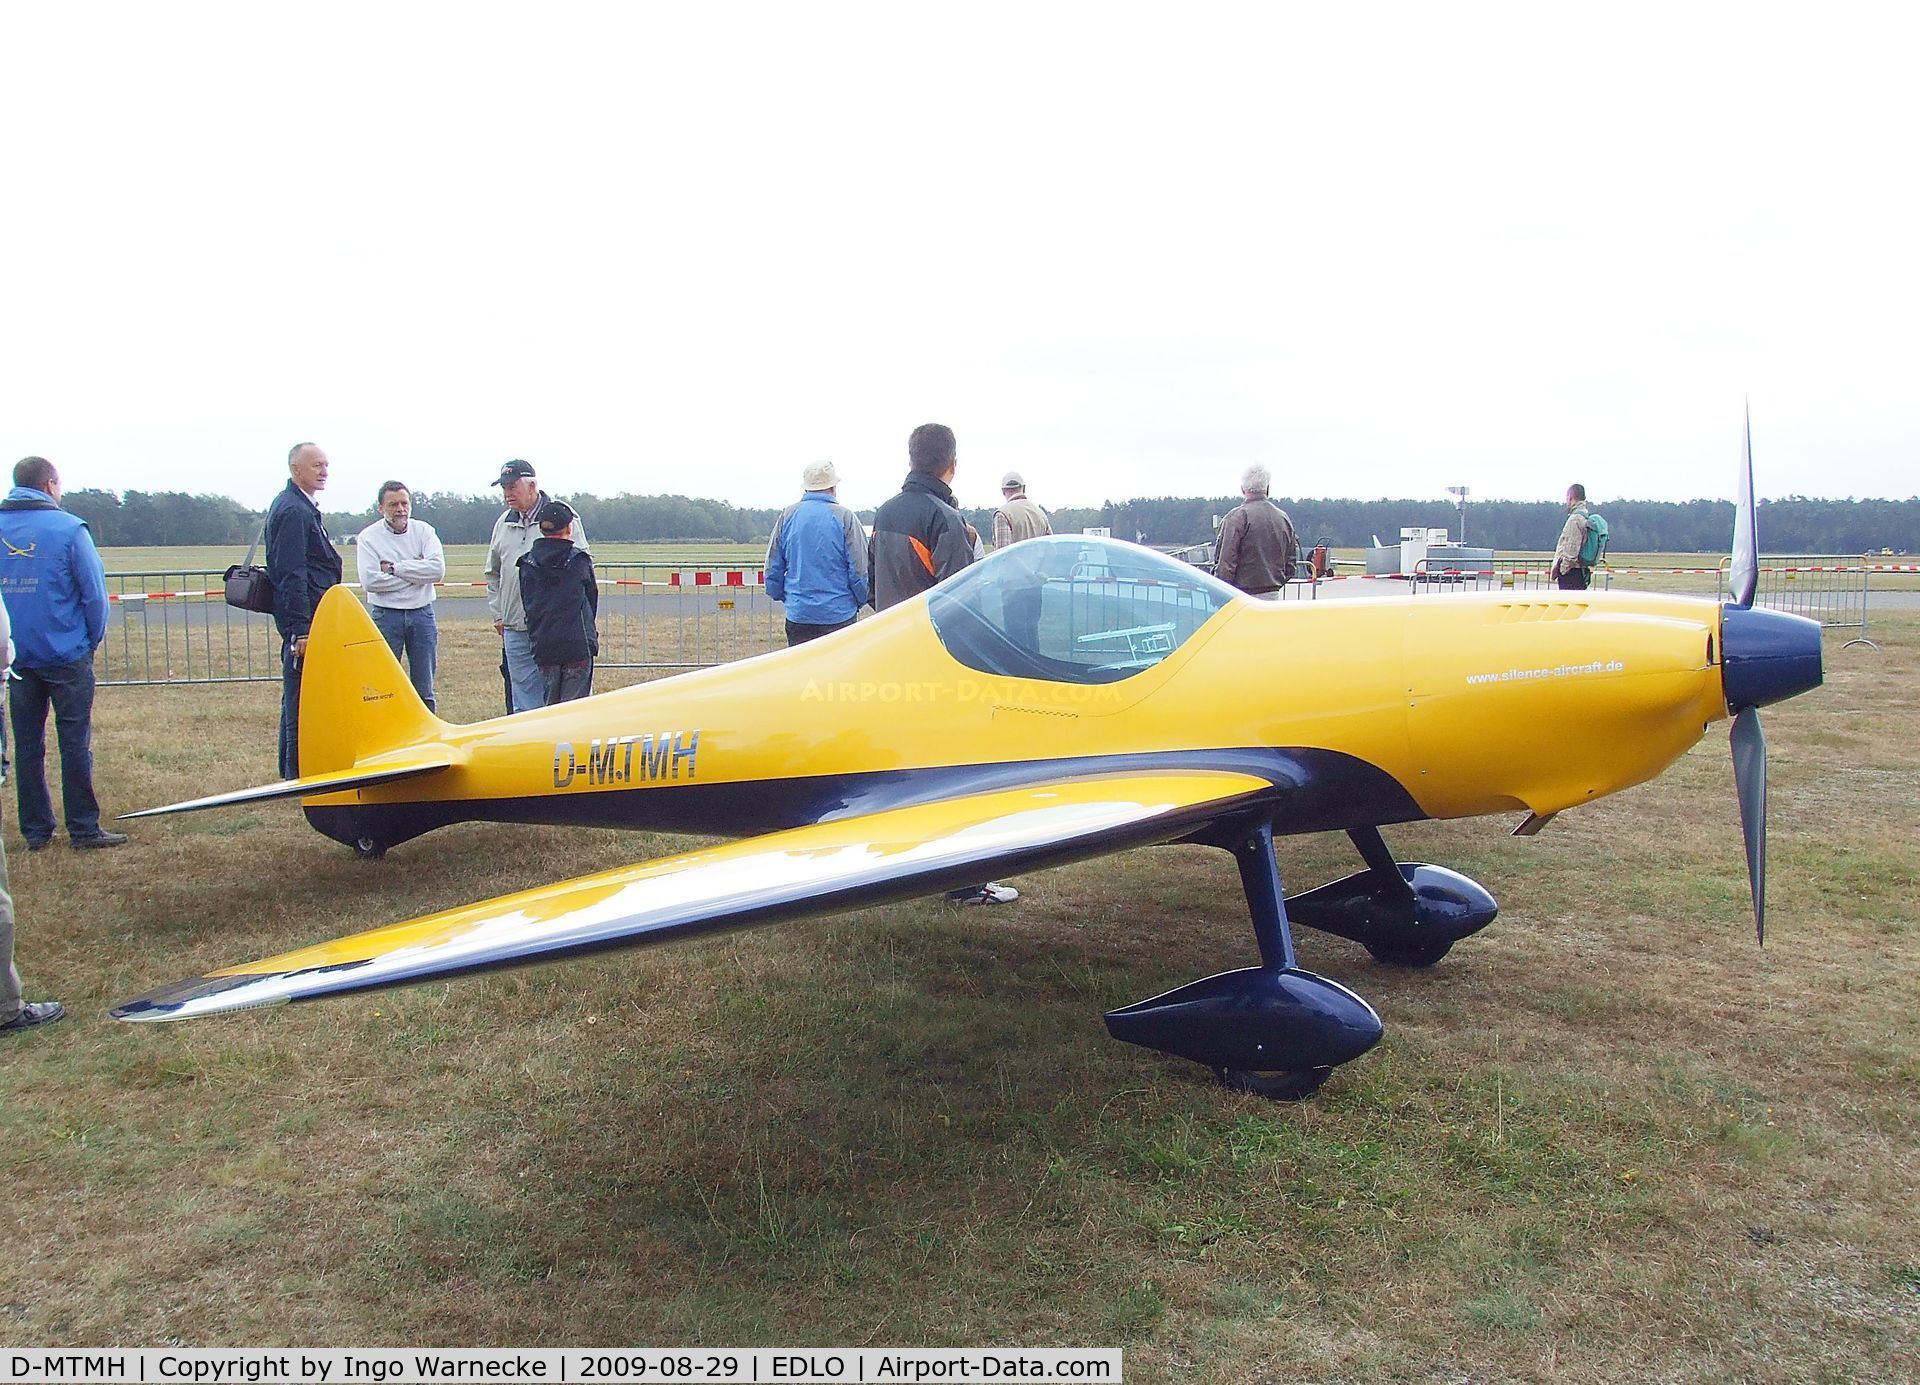 D-MTMH, 2000 Silence Twister C/N 001, Silence Twister prototype at the 2009 OUV-Meeting at Oerlinghausen airfield